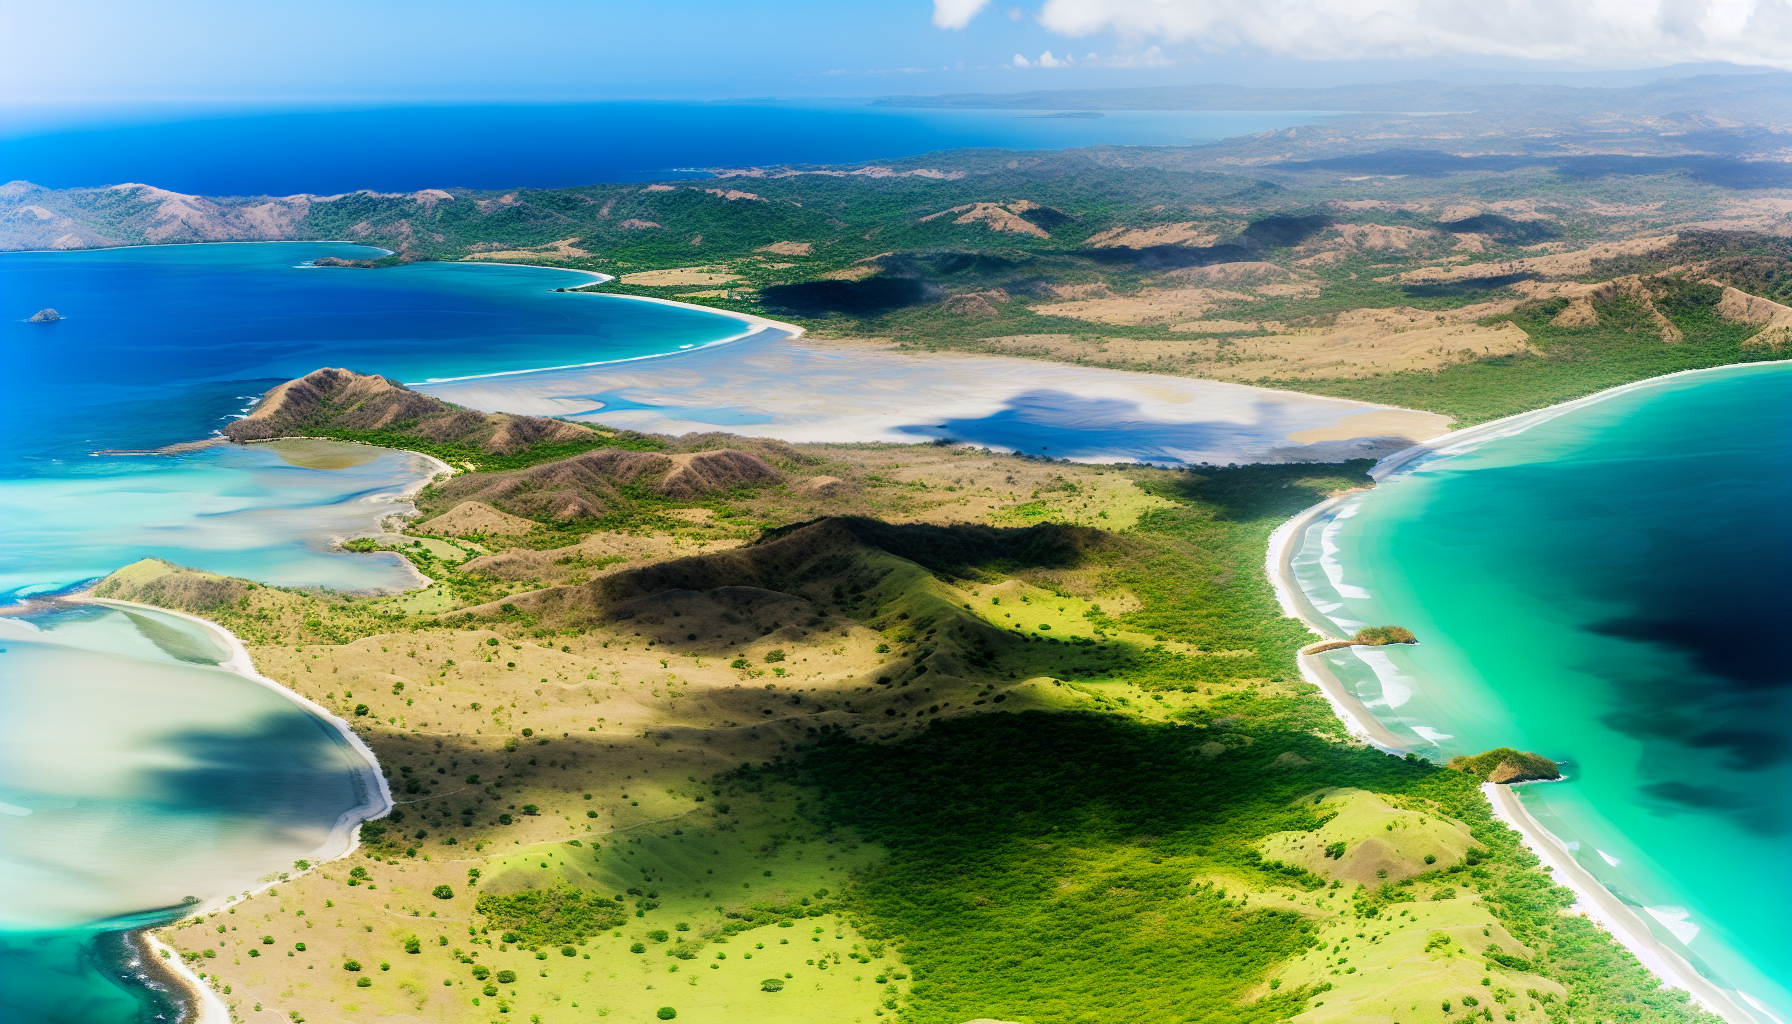 Aerial view of Papagayo Peninsula and its pristine beaches